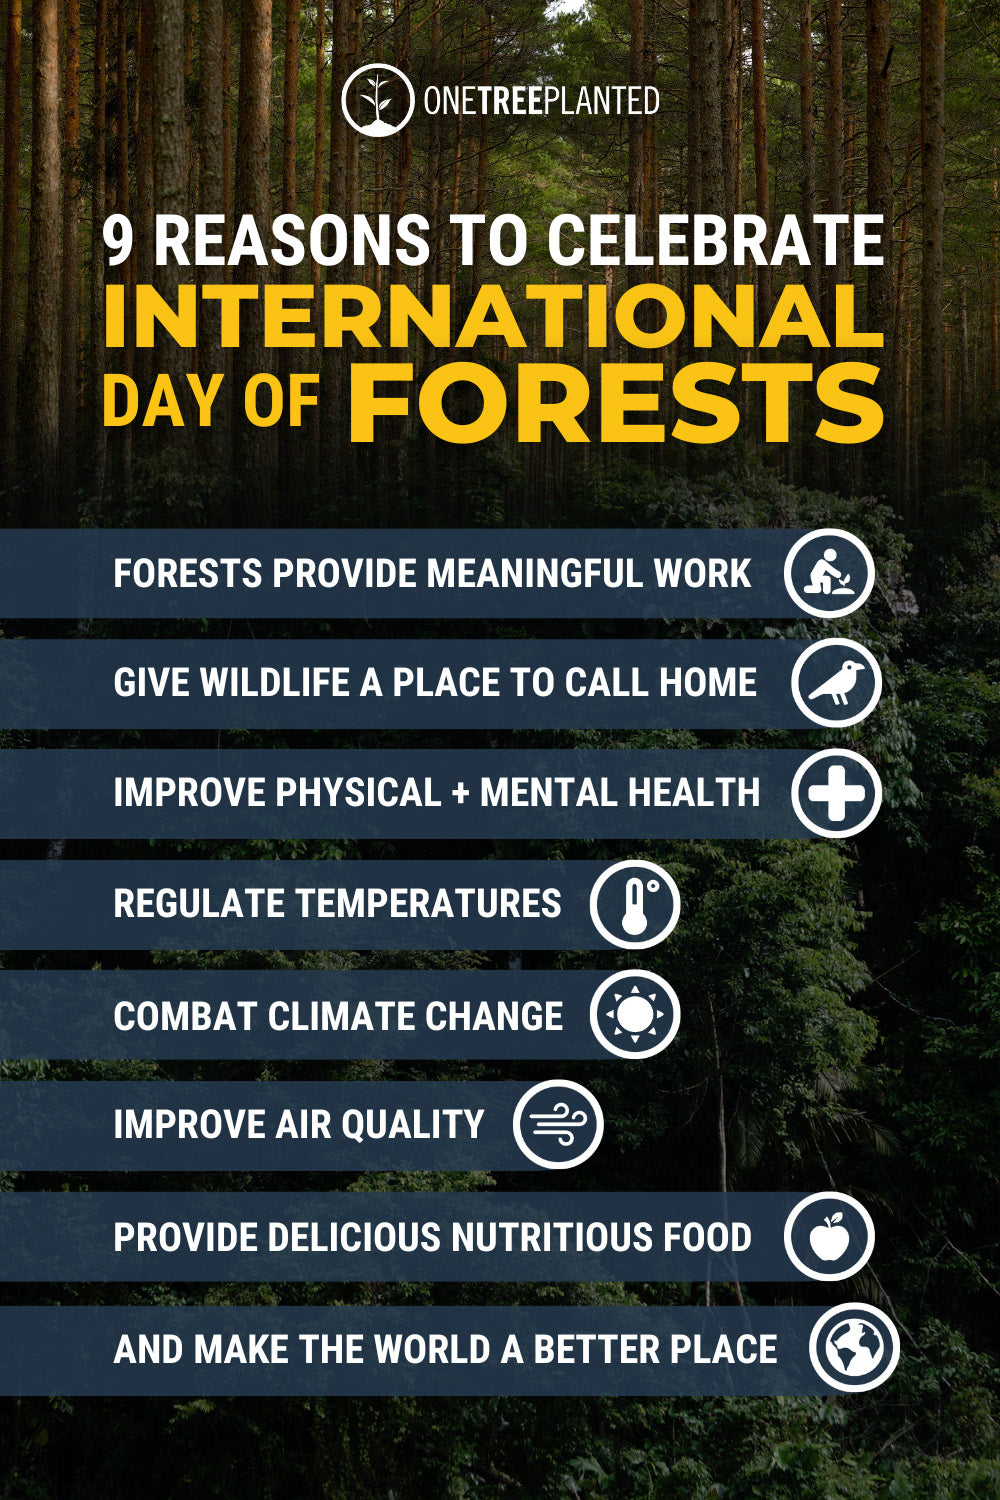 9 Reasons to Celebrate International Day of Forests